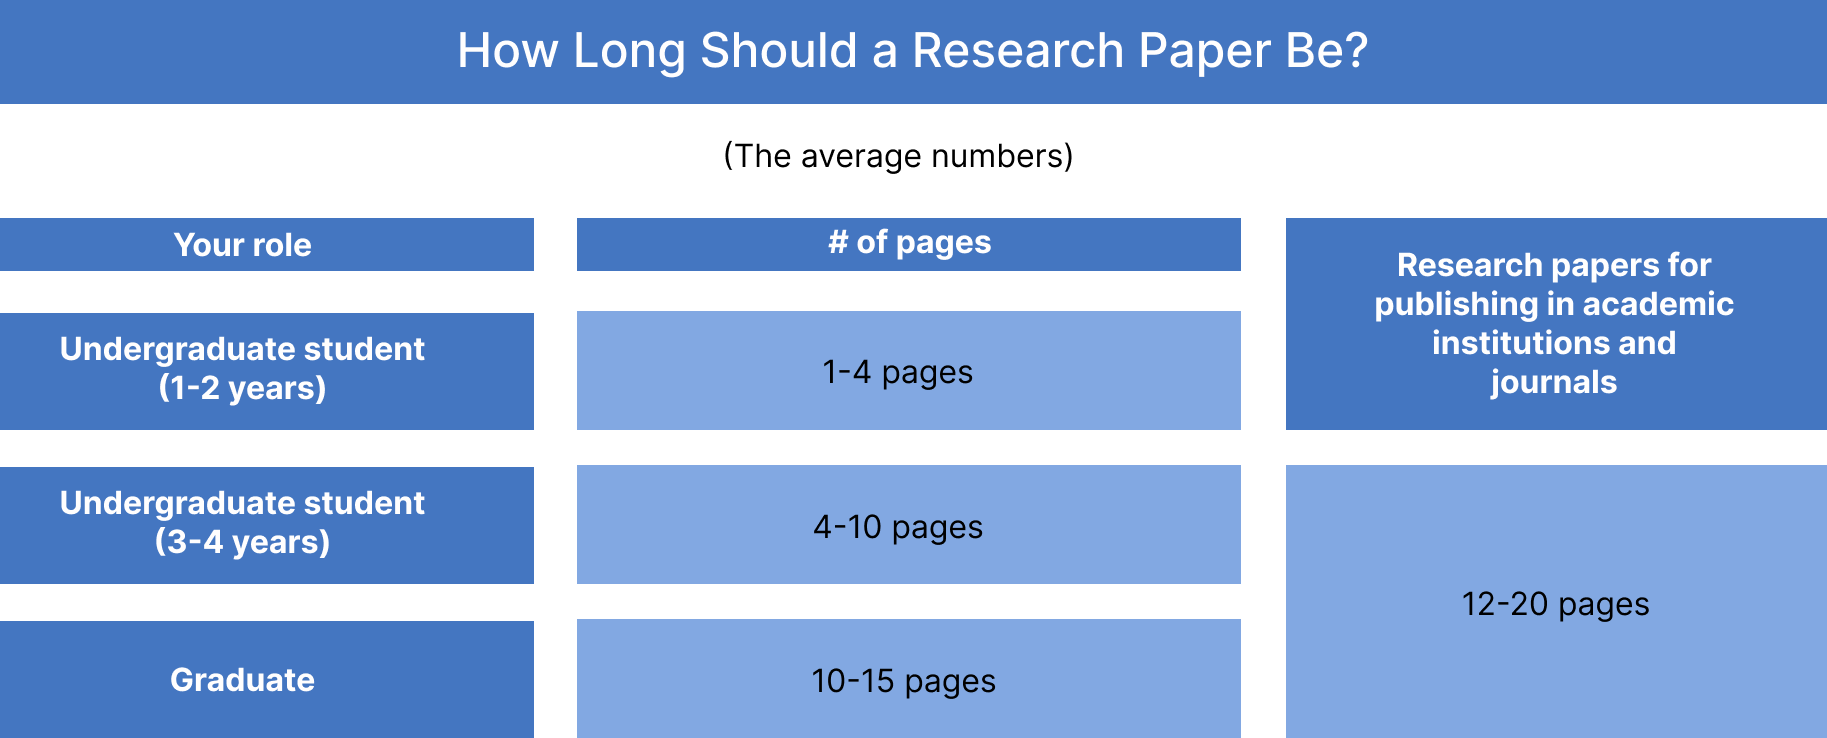 5) the usual length of a research paper is